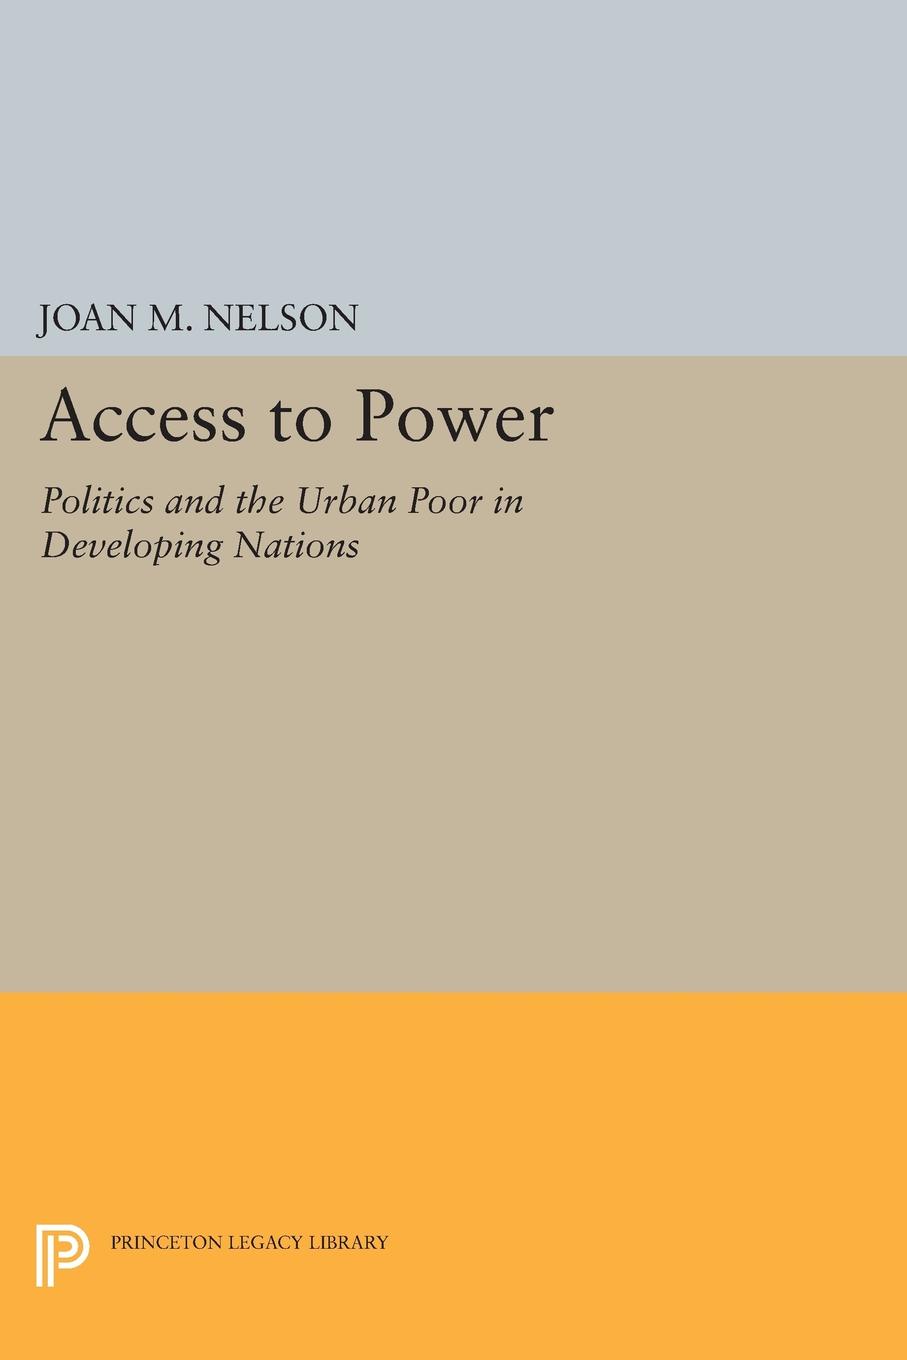 Access to Power. Politics and the Urban Poor in Developing Nations